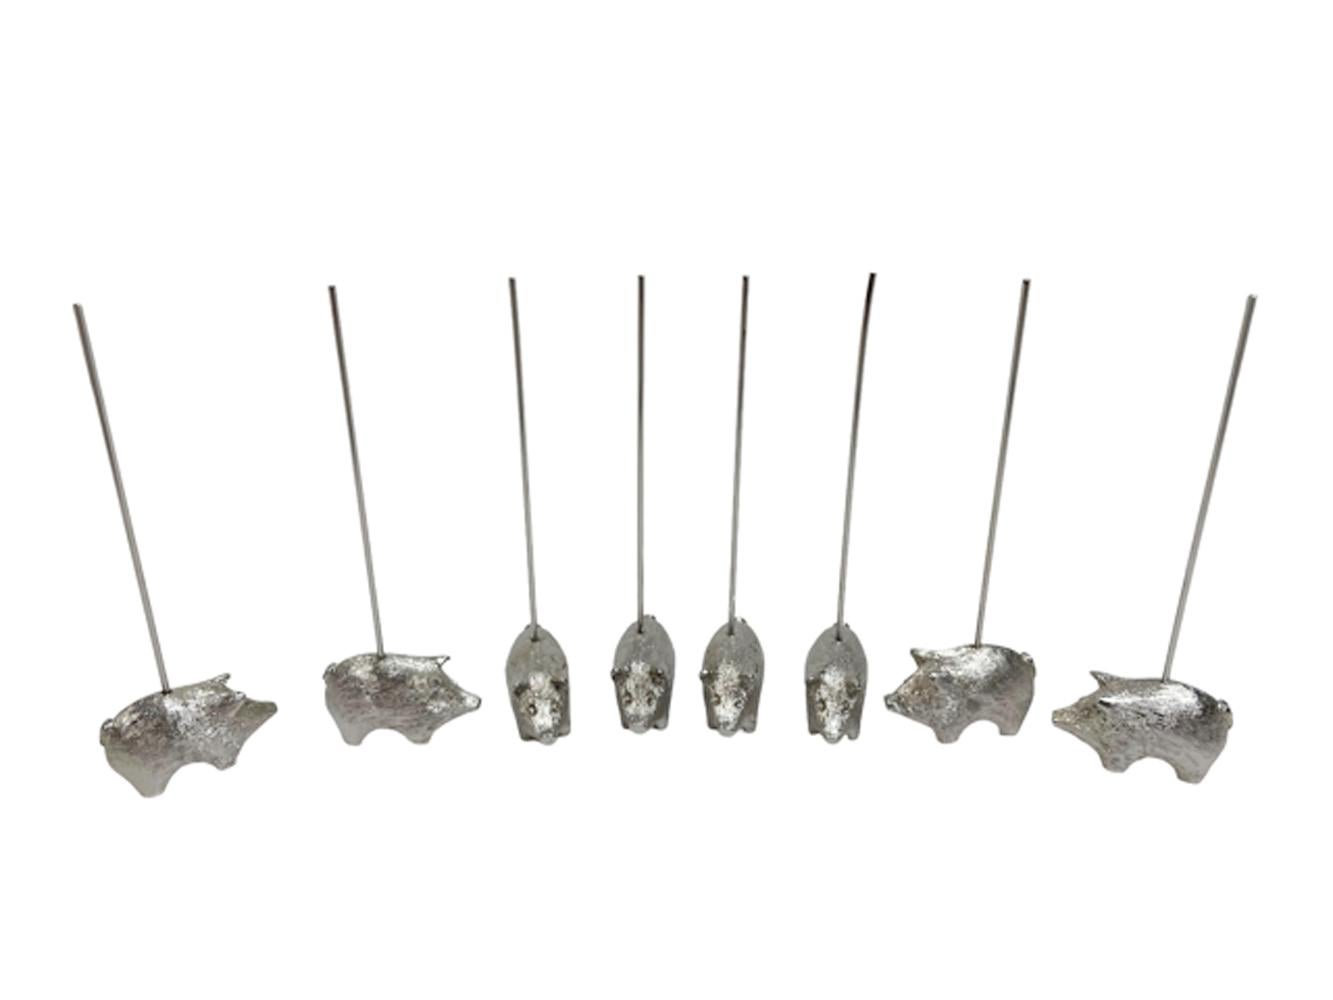 Set of eight appetizer picks in the form of piglets supporting metal skewers for serving individual hors d' oeuvres. The set is still in its original box. 